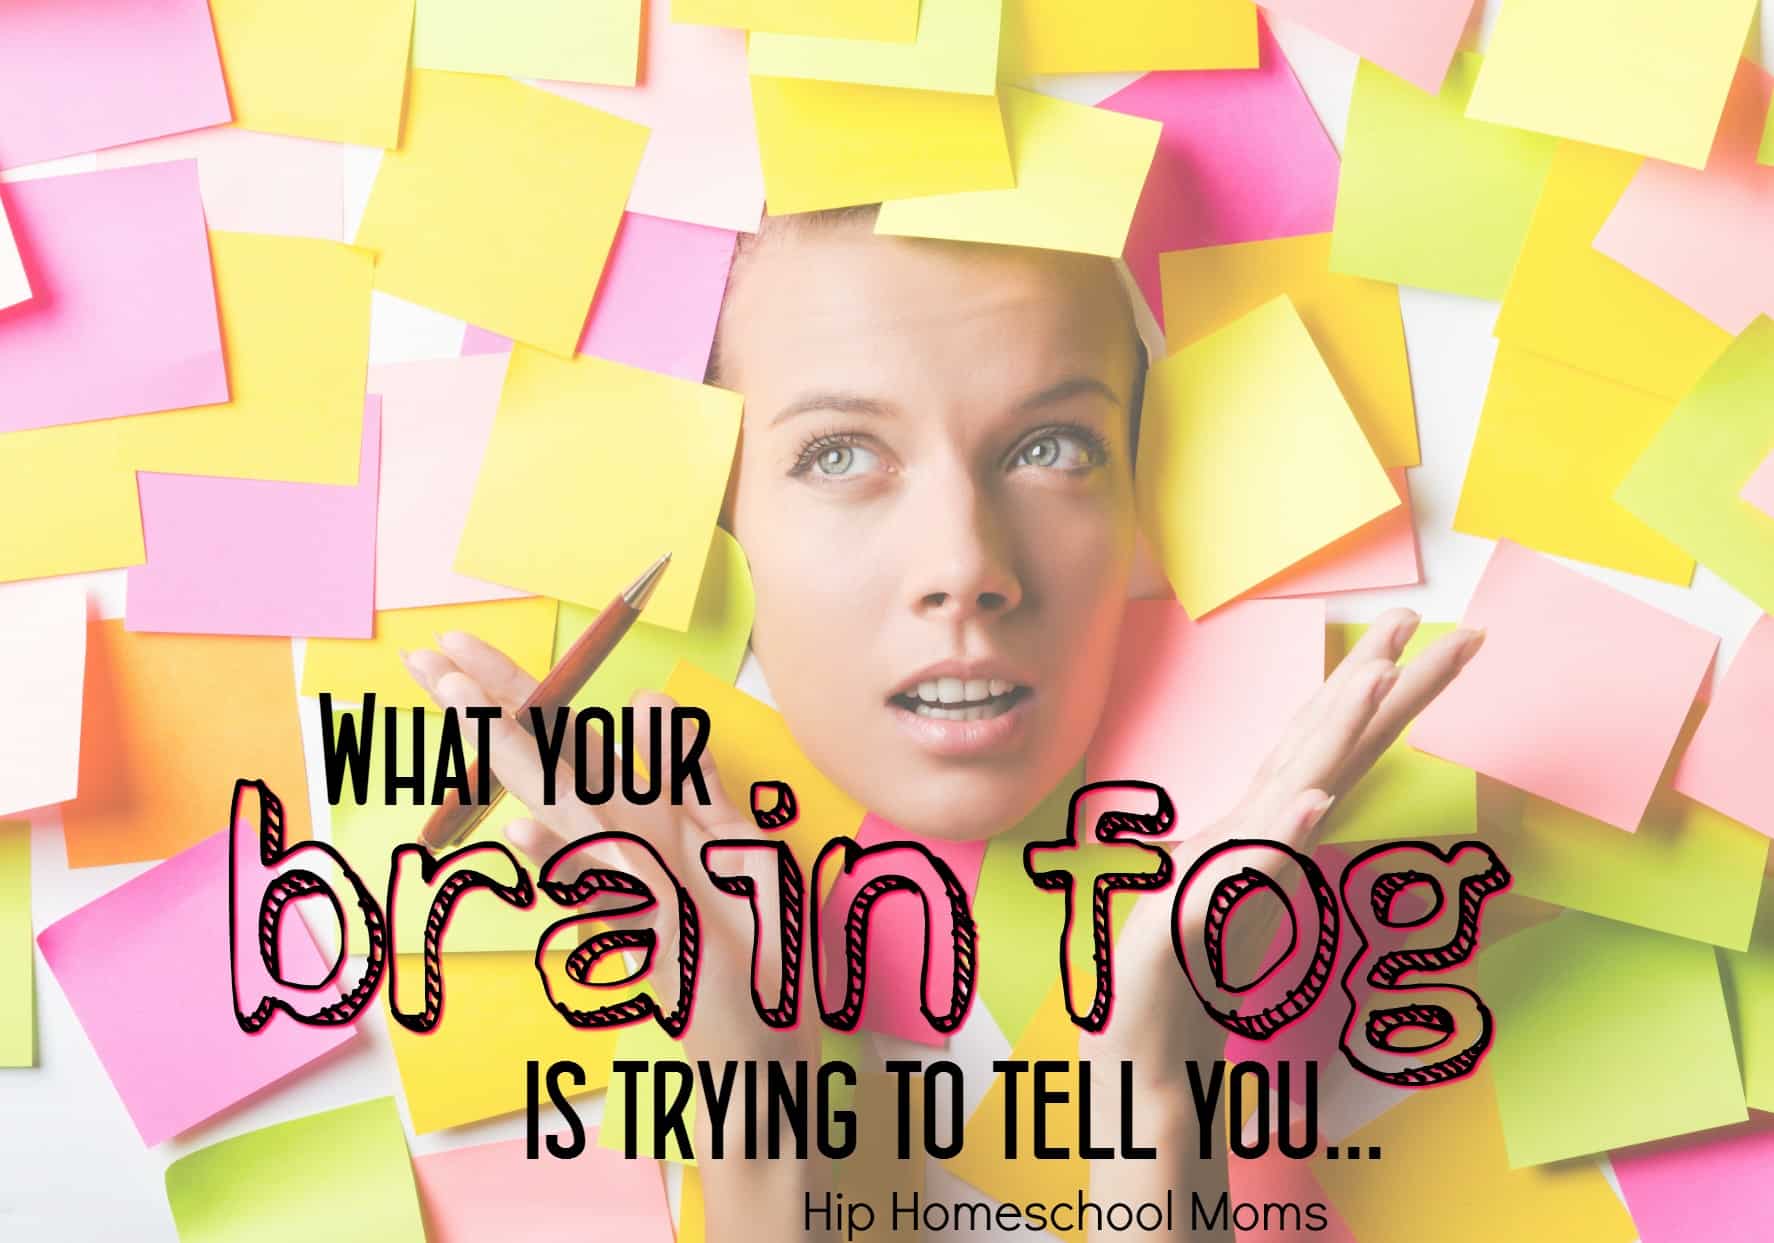 What Your Brain Fog Is Trying to Tell You